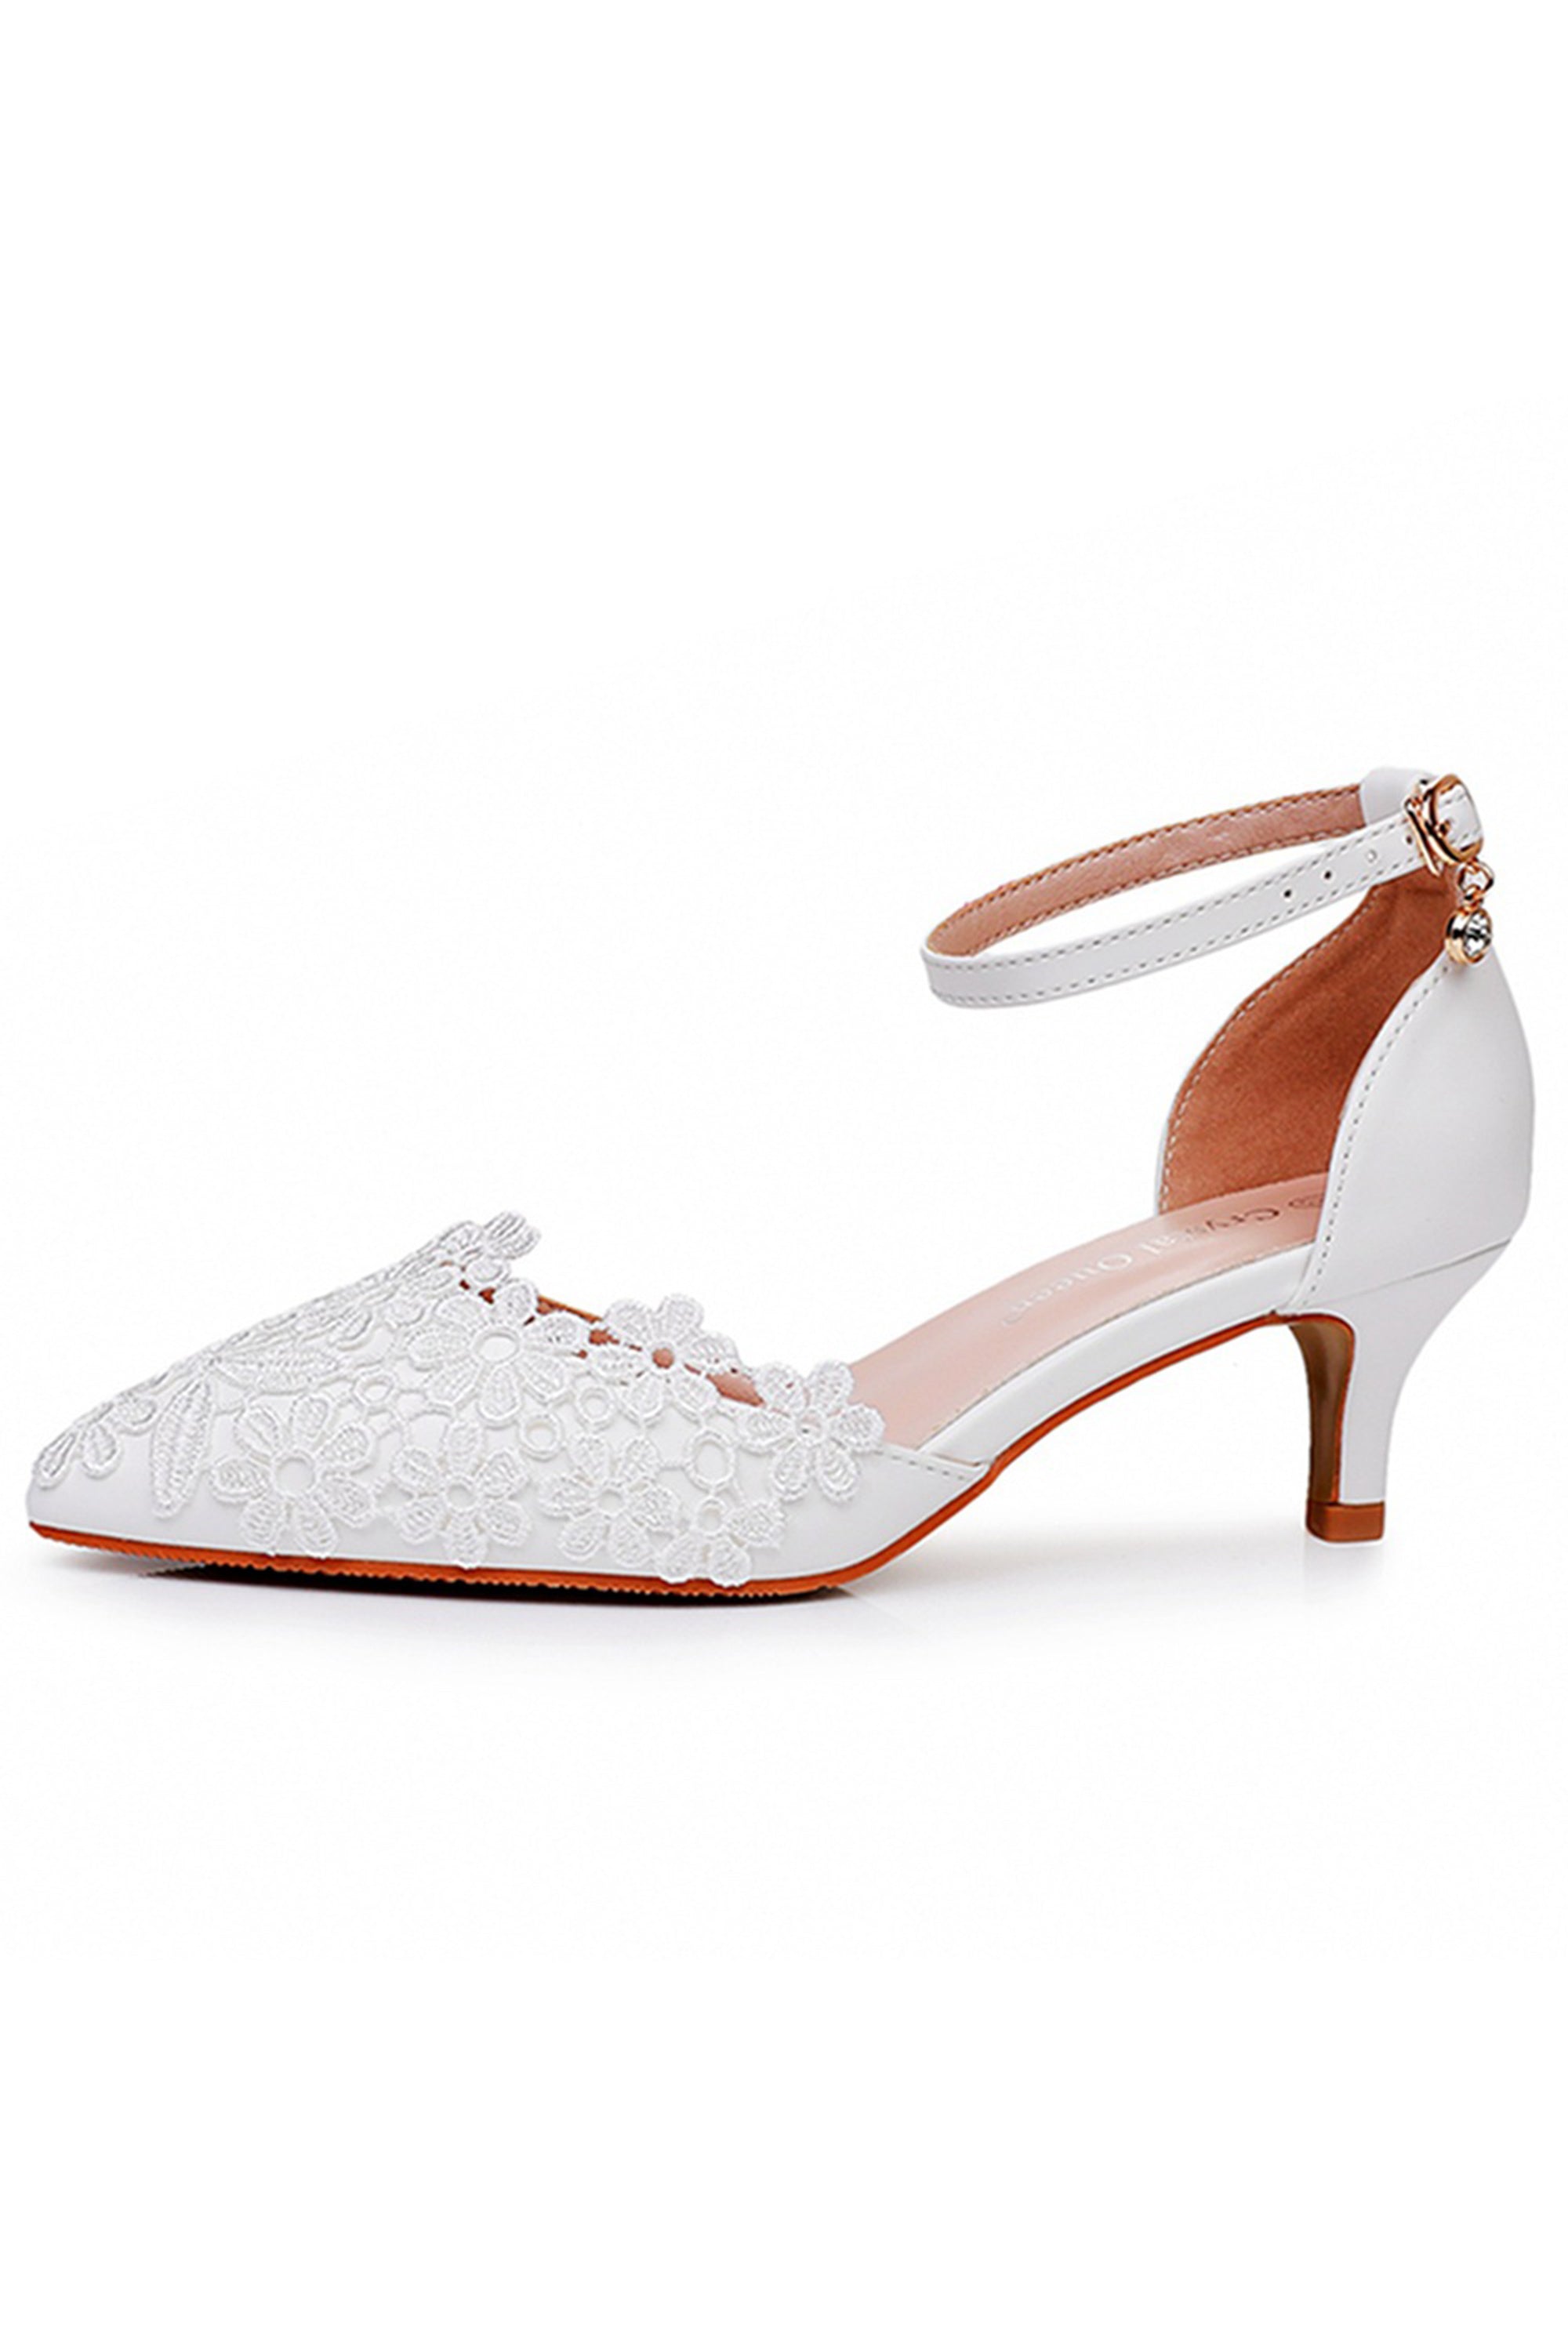 White Lace Stiletto Heel Pointed Toe Wedding Shoes